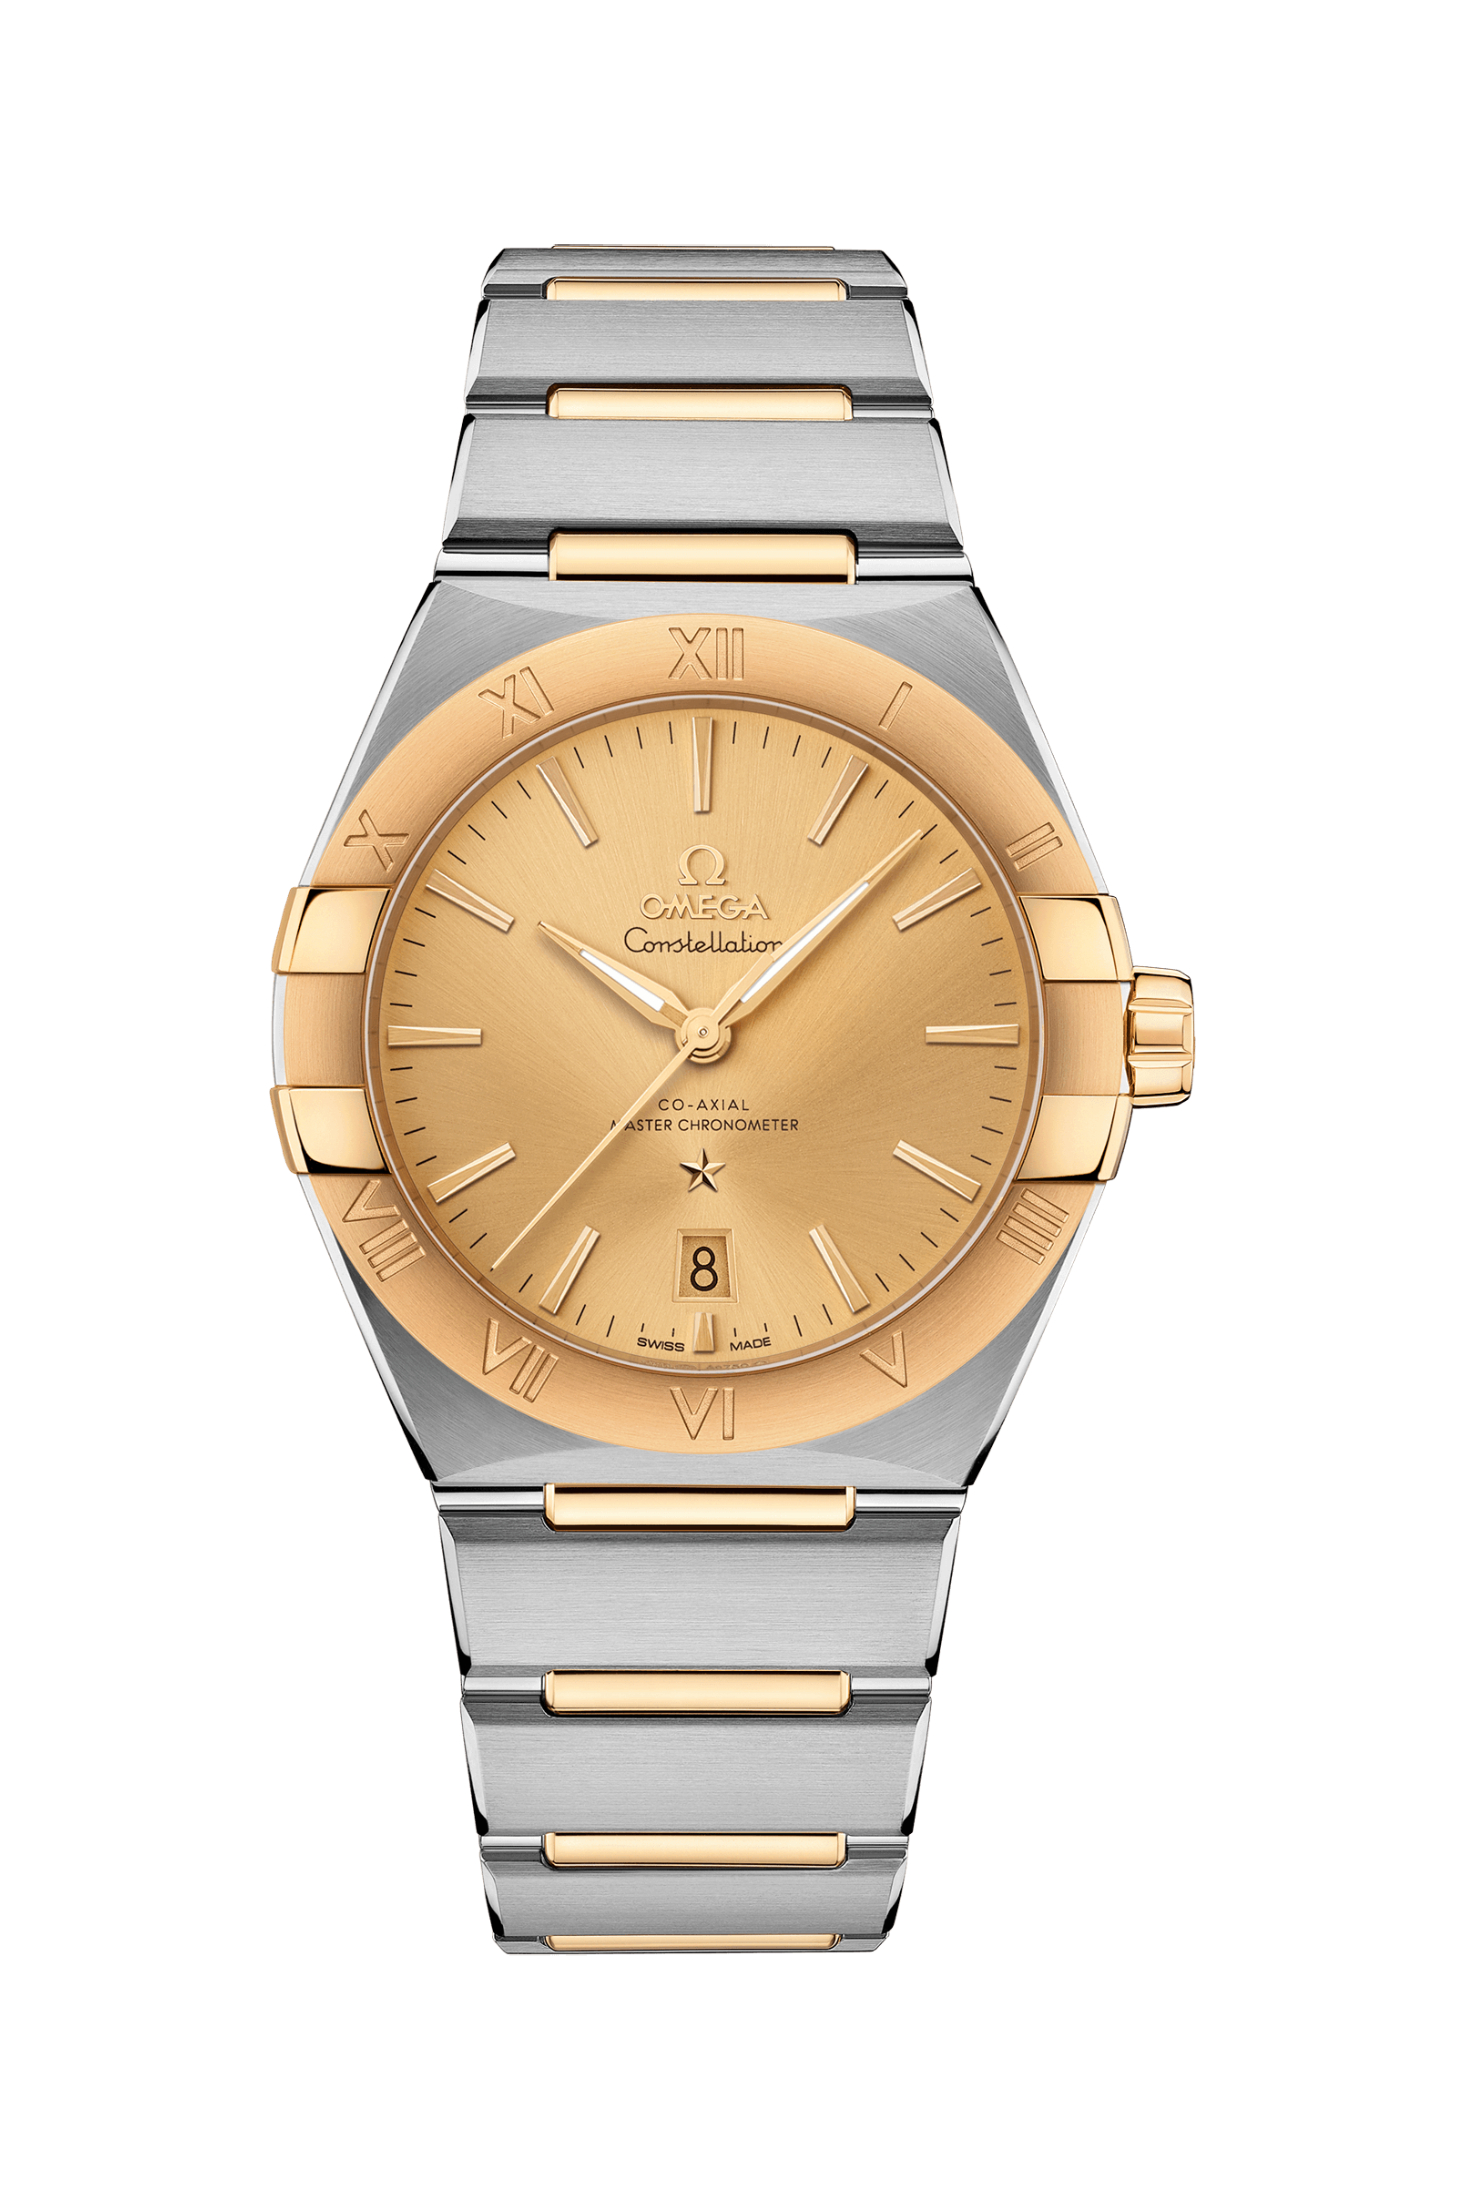 Men's watch / unisex  OMEGA, Constellation Co Axial Master Chronometer / 39mm, SKU: 131.20.39.20.08.001 | watchapproach.com